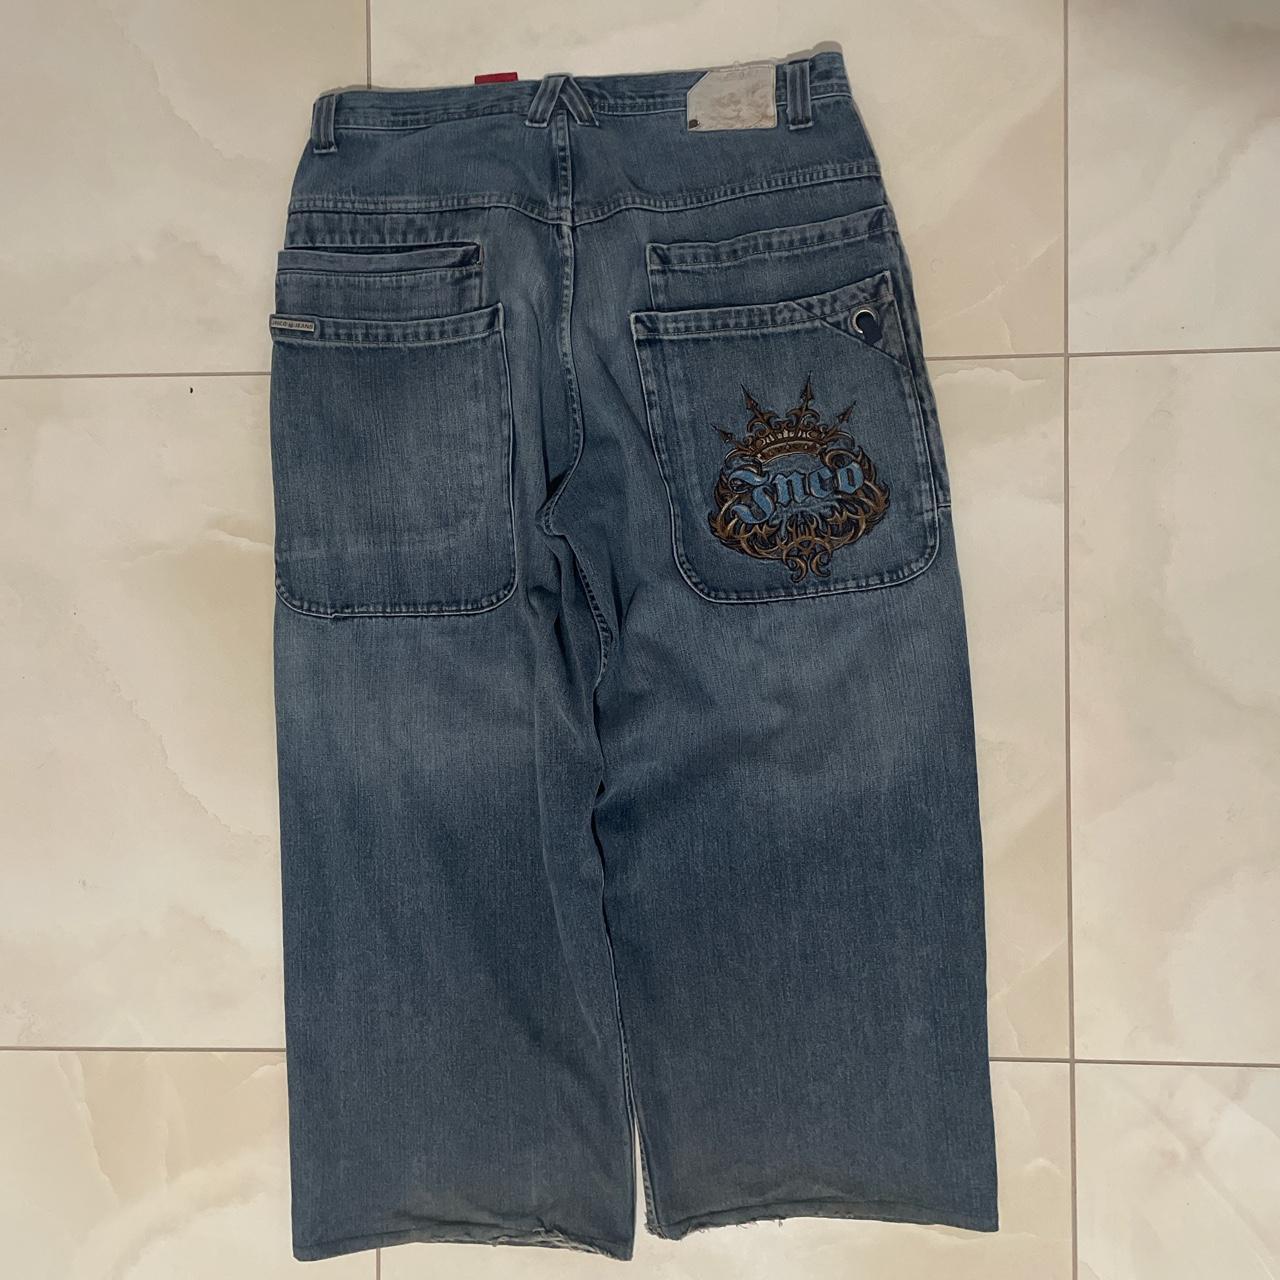 Vintage Baggy Jnco Jeans with tribal... - Depop